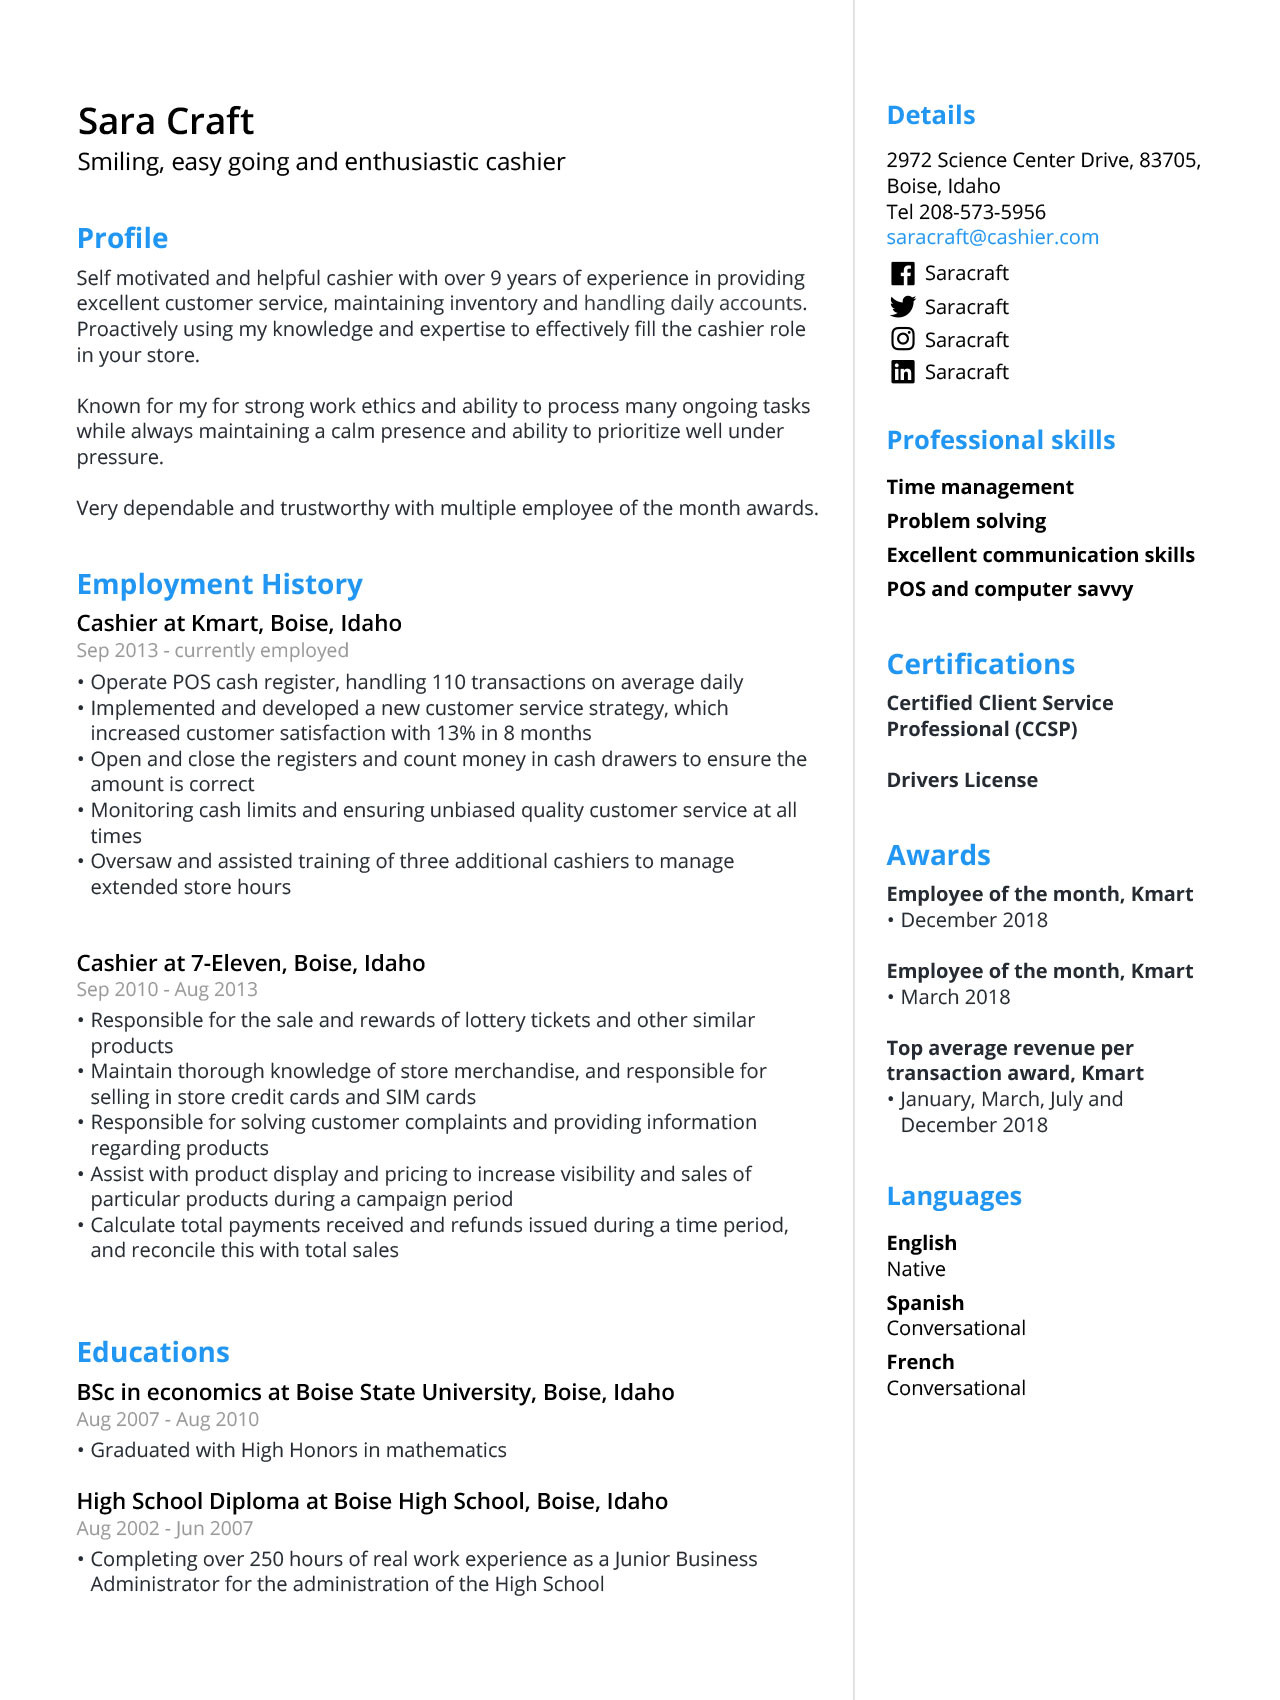 Sample Resume with Honors and Awards Cashier Resume Sample & Template [2022 Guide] – Jofibo